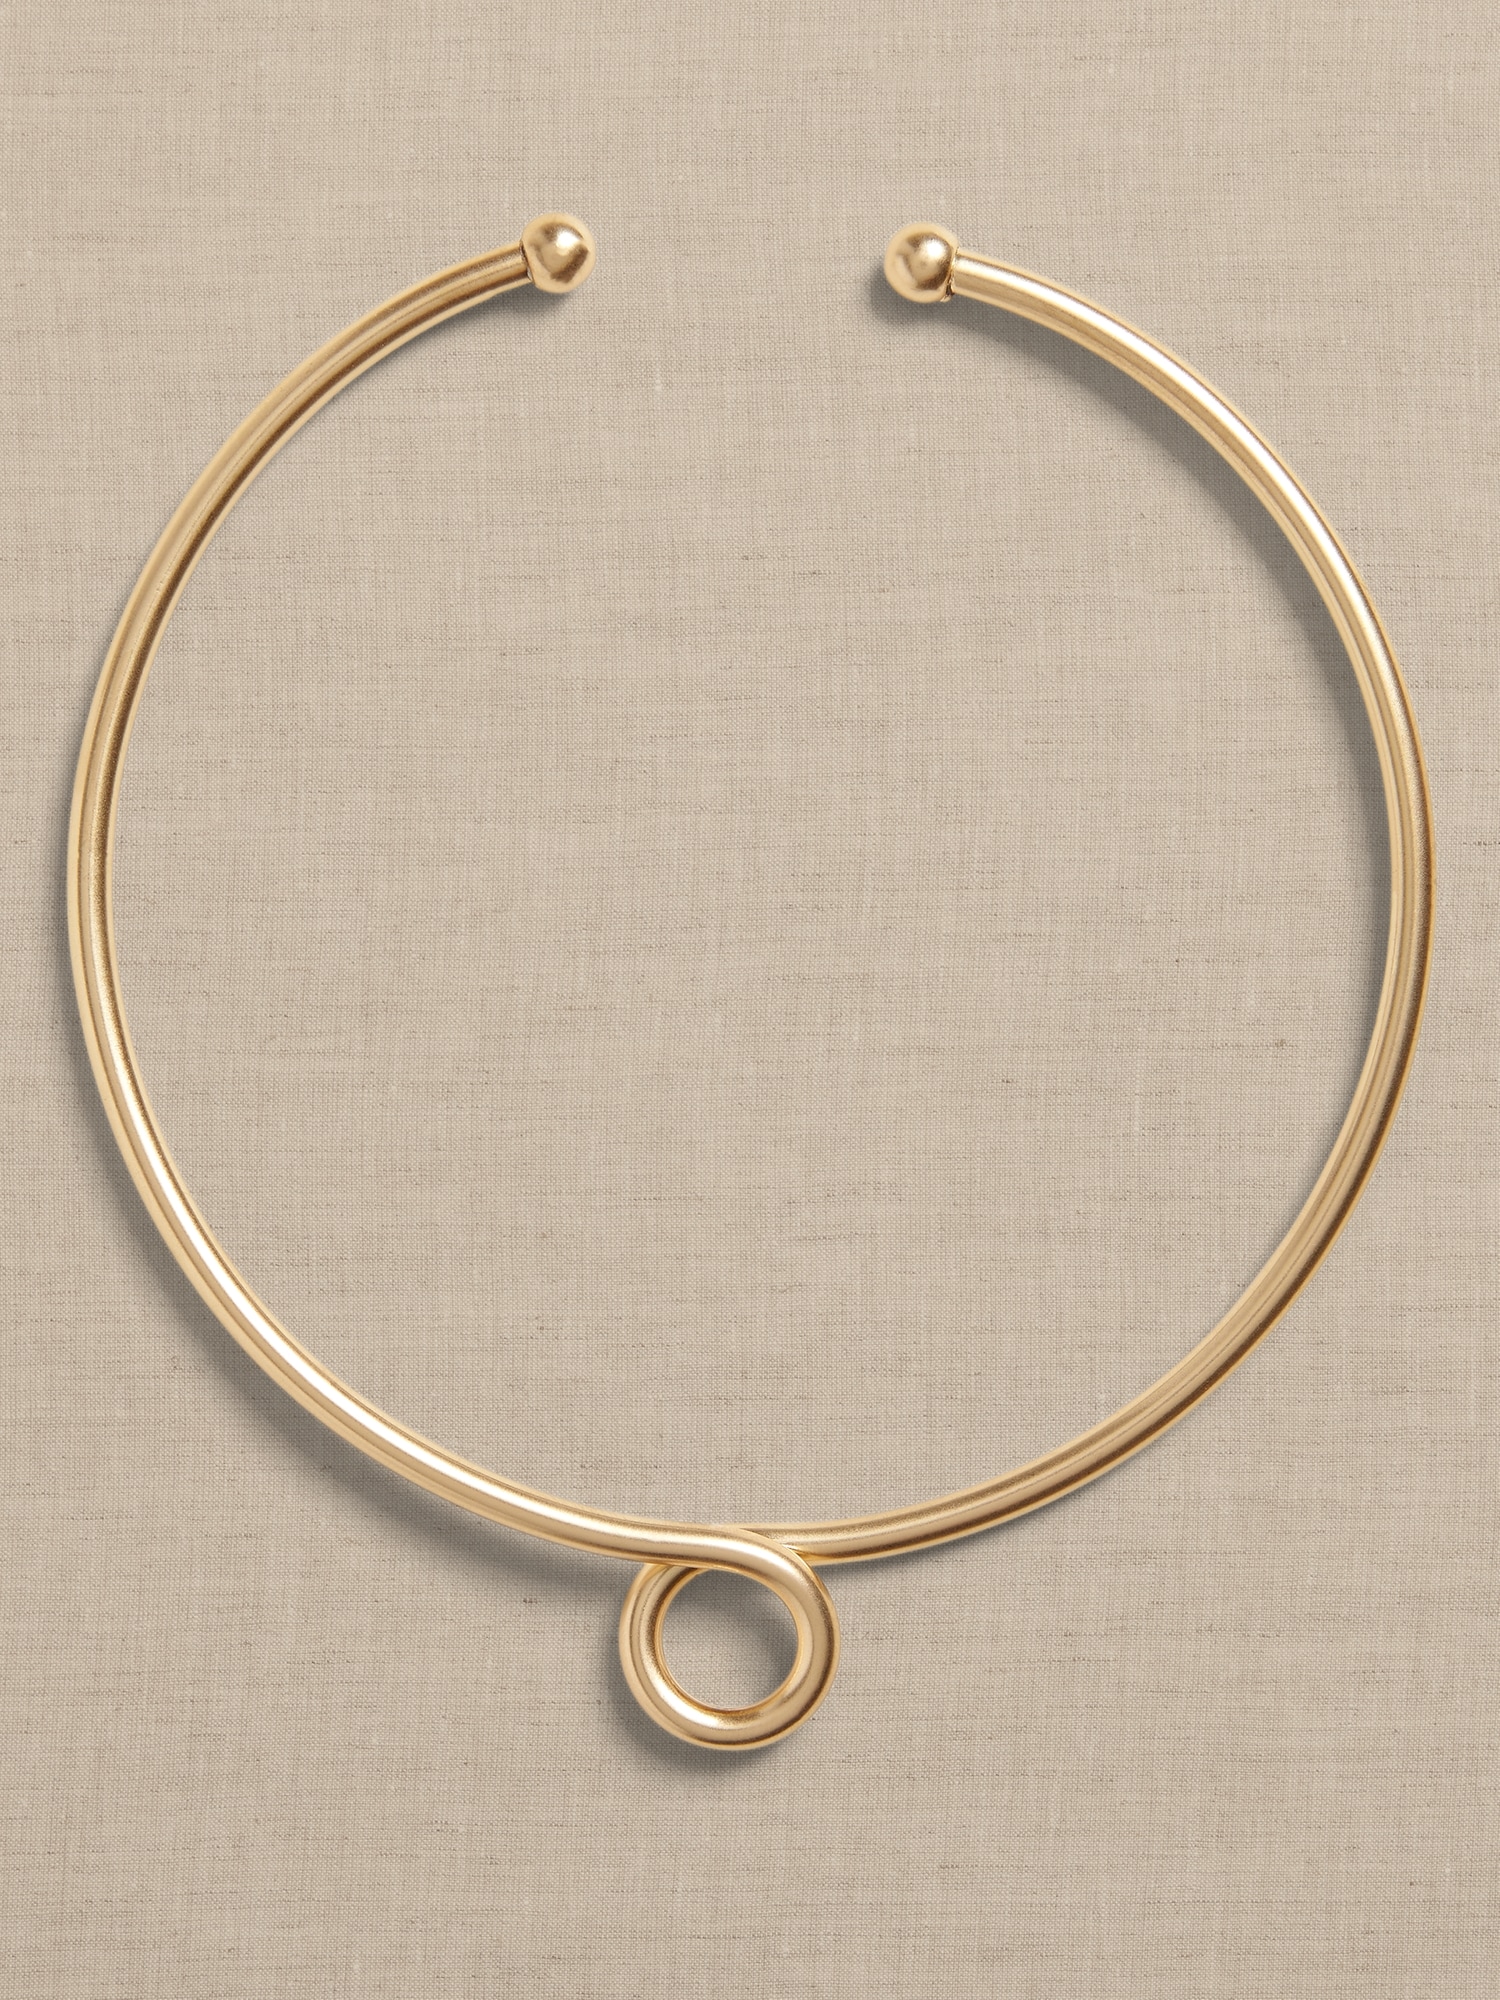 Metal Centered Twisted Circle Collar Necklace